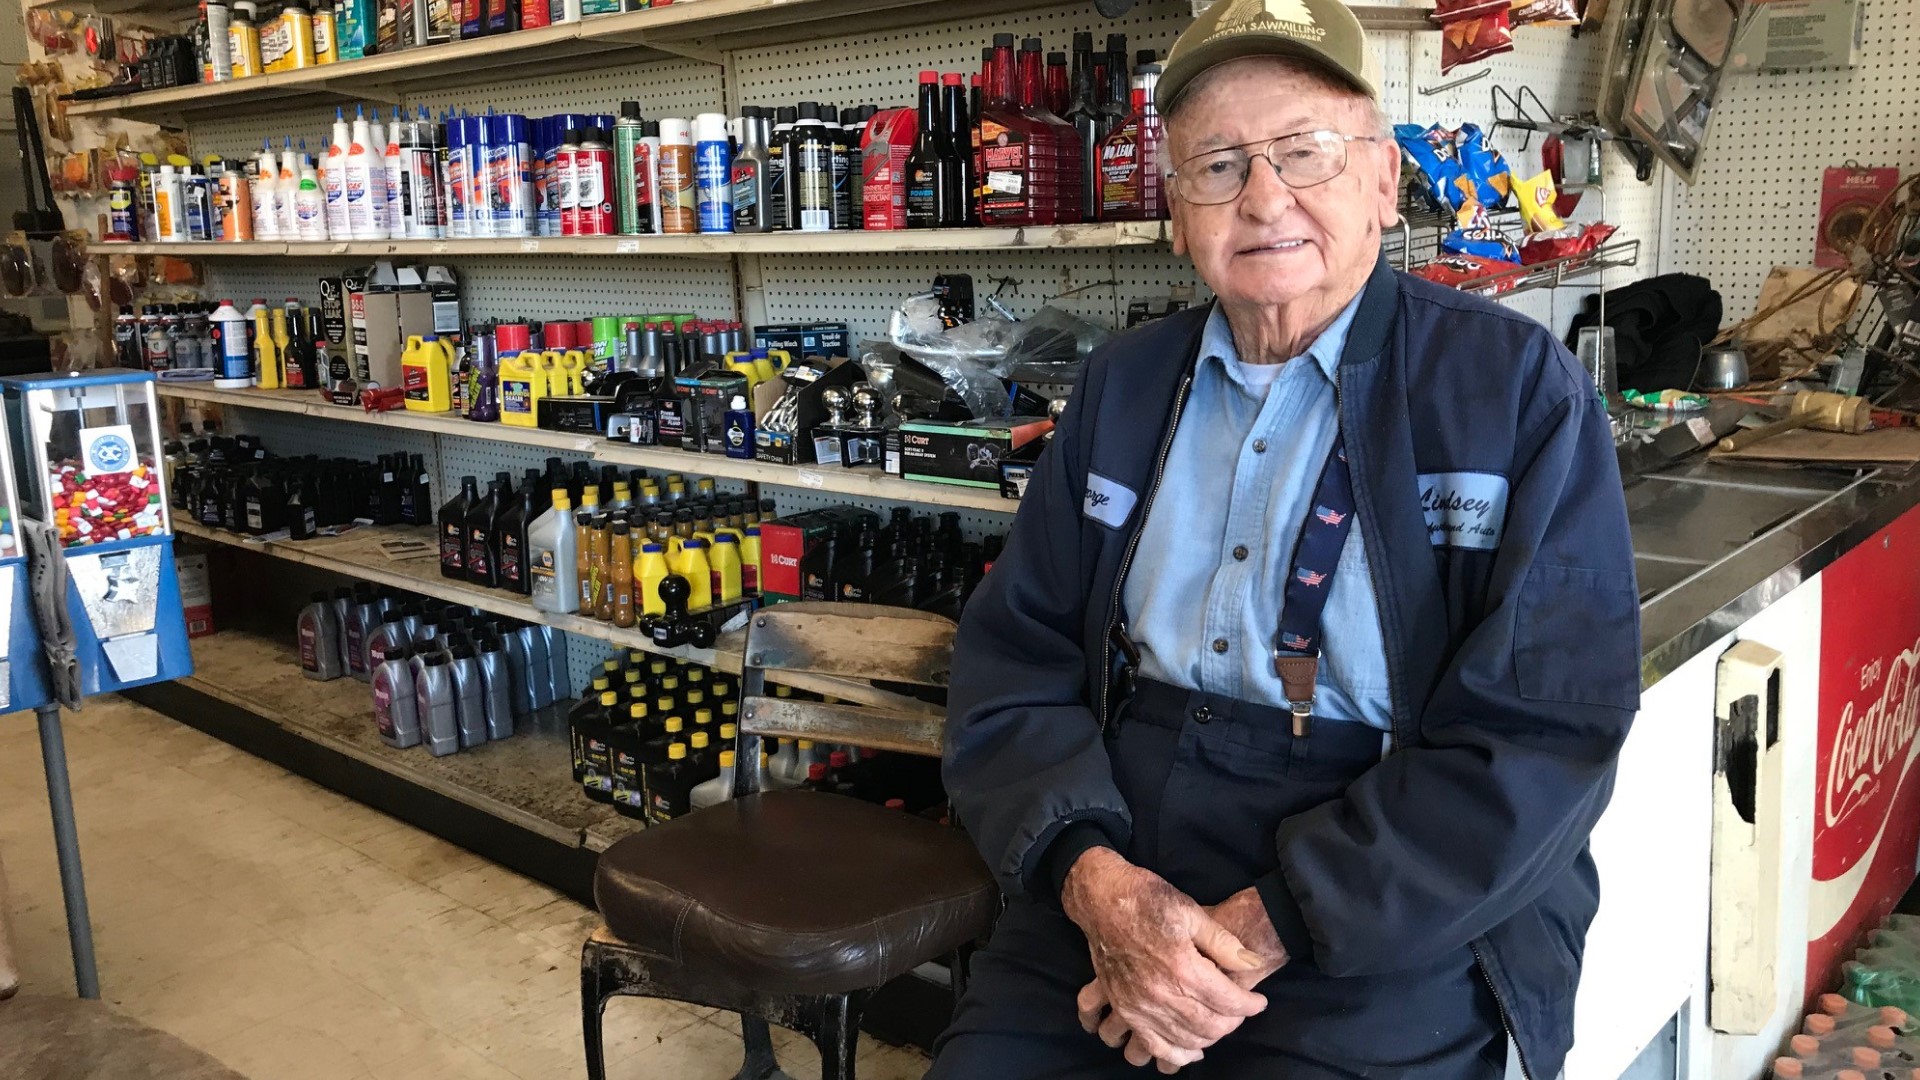 George Lindsey, who owns Lindsey's Hardware & Auto in Rentz, still pumps gas and chats with customers every day